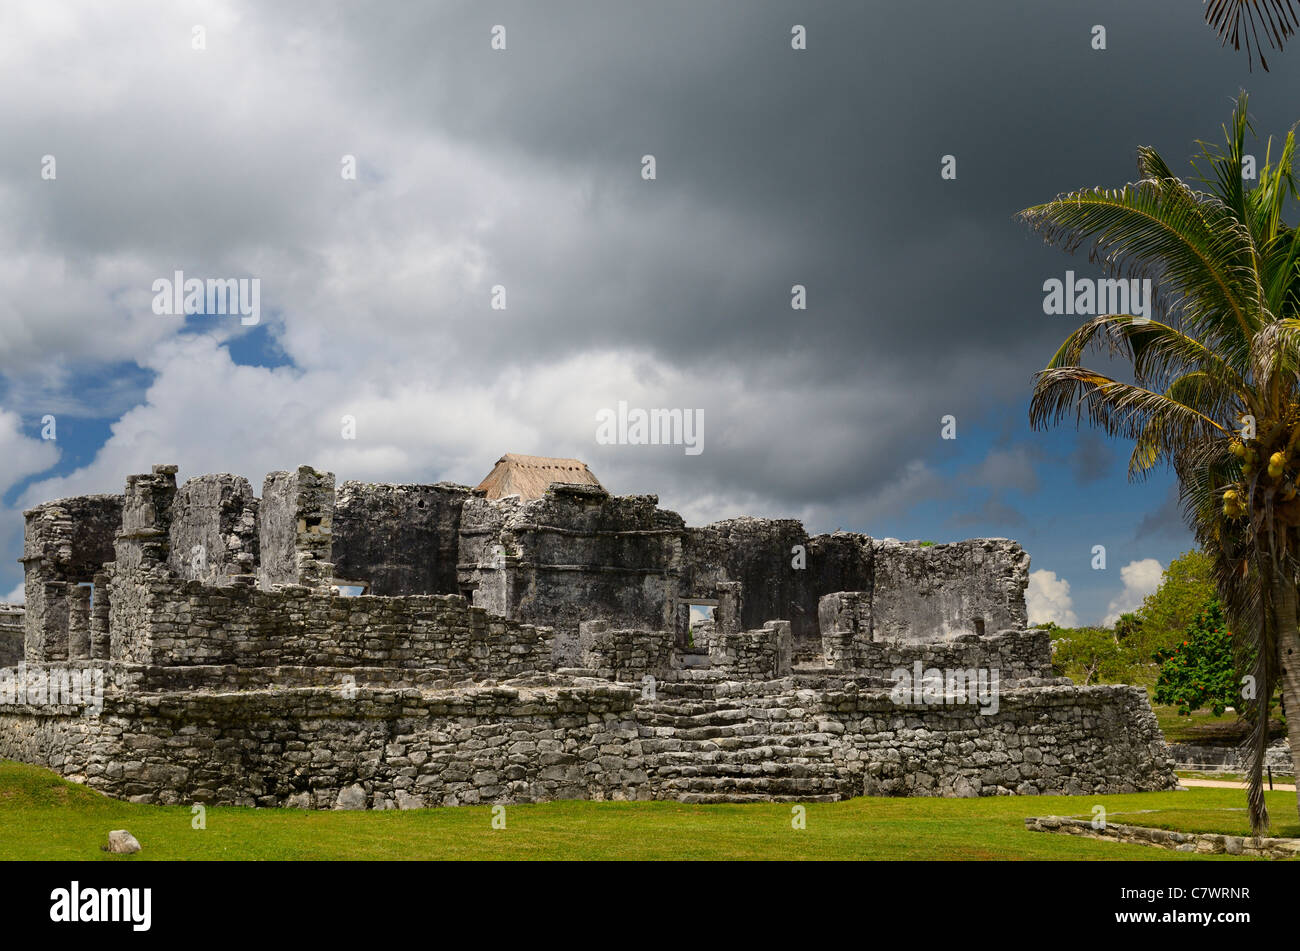 Temple of the Descending God at Tulum Mexico with storm cloud and coconut palm tree Stock Photo